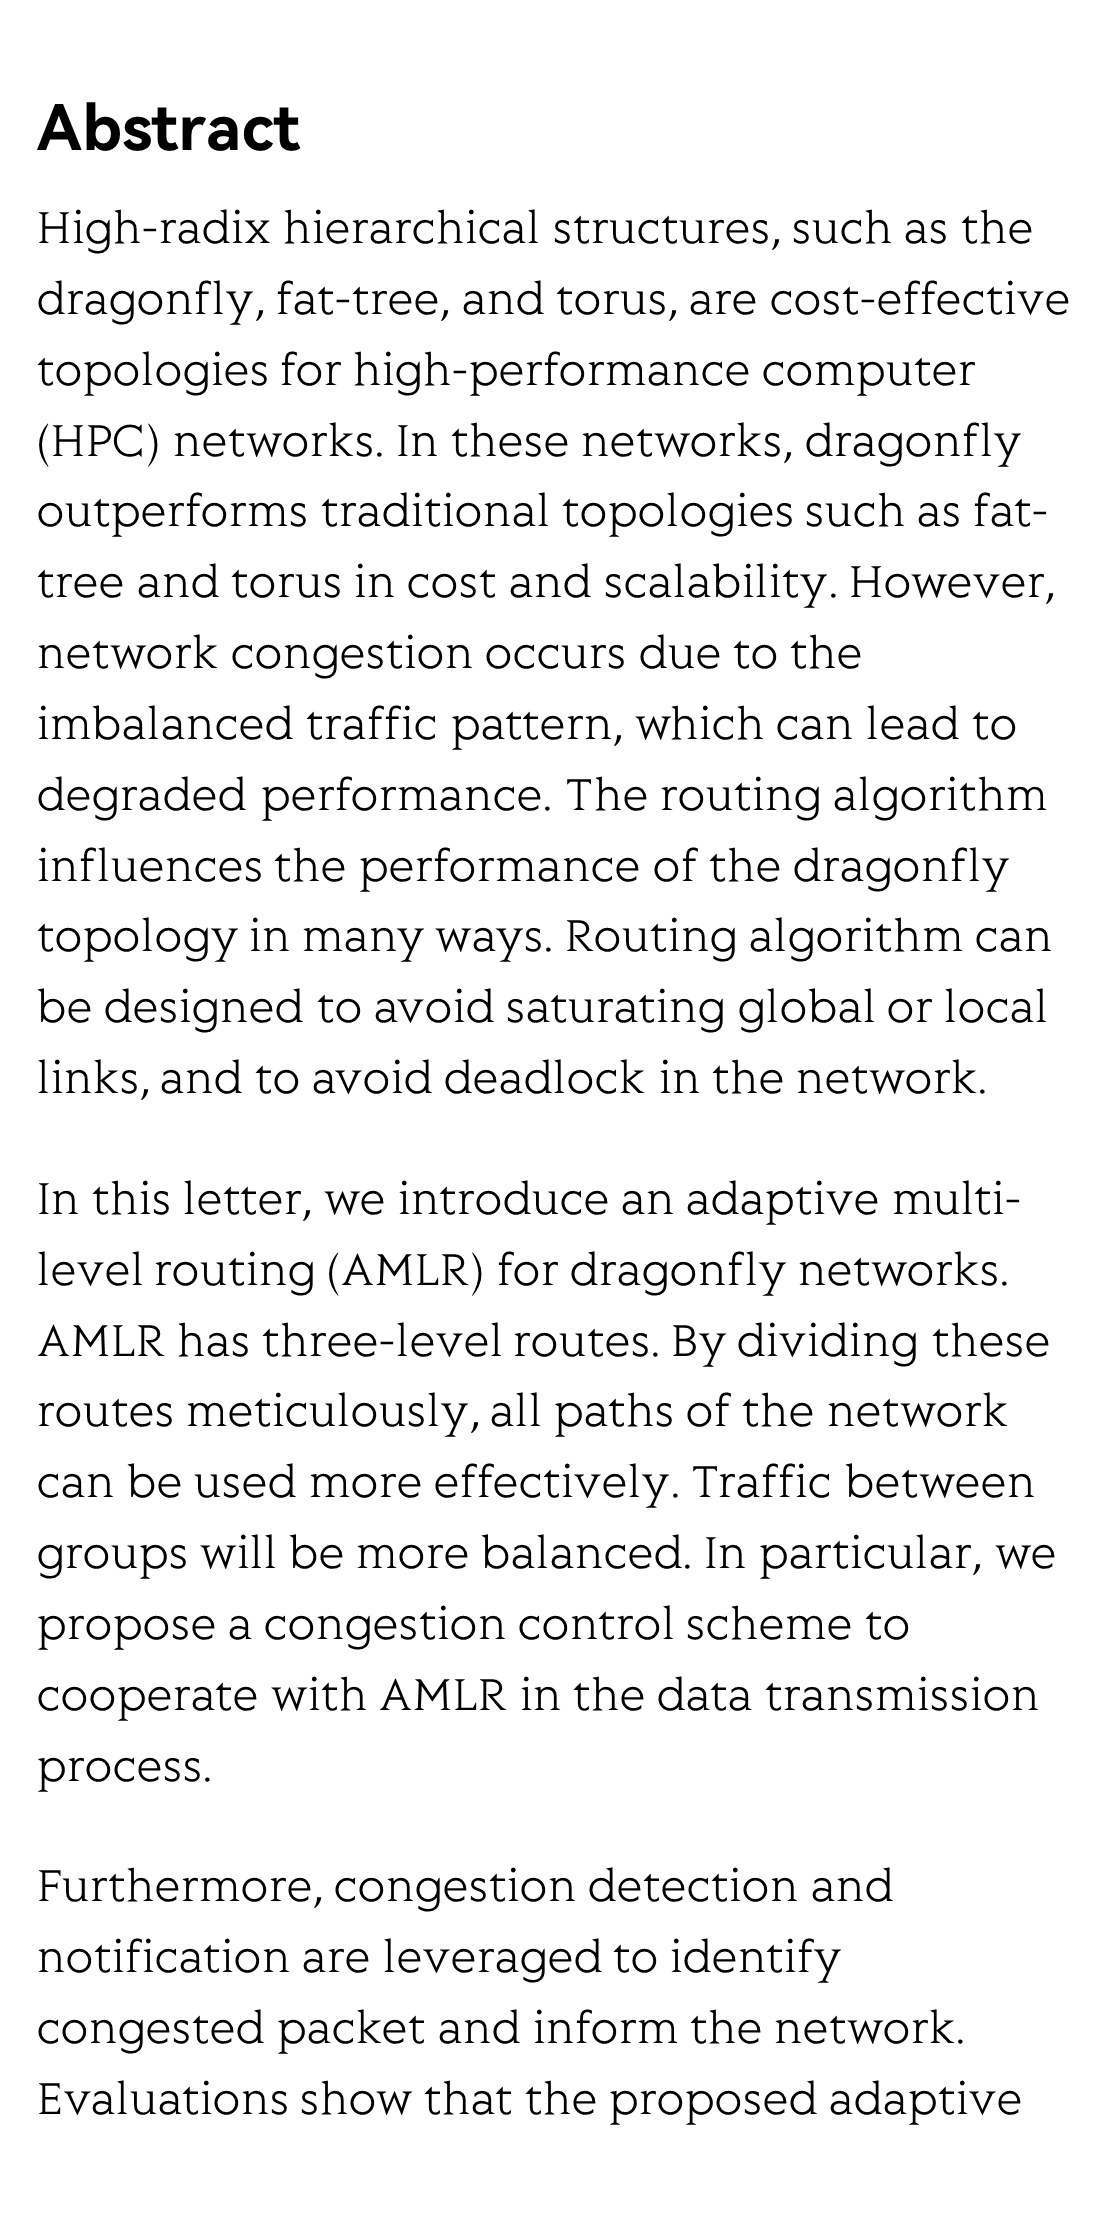 AMLR: An Adaptive Multi-level Routing Algorithm for Dragonfly Network_2